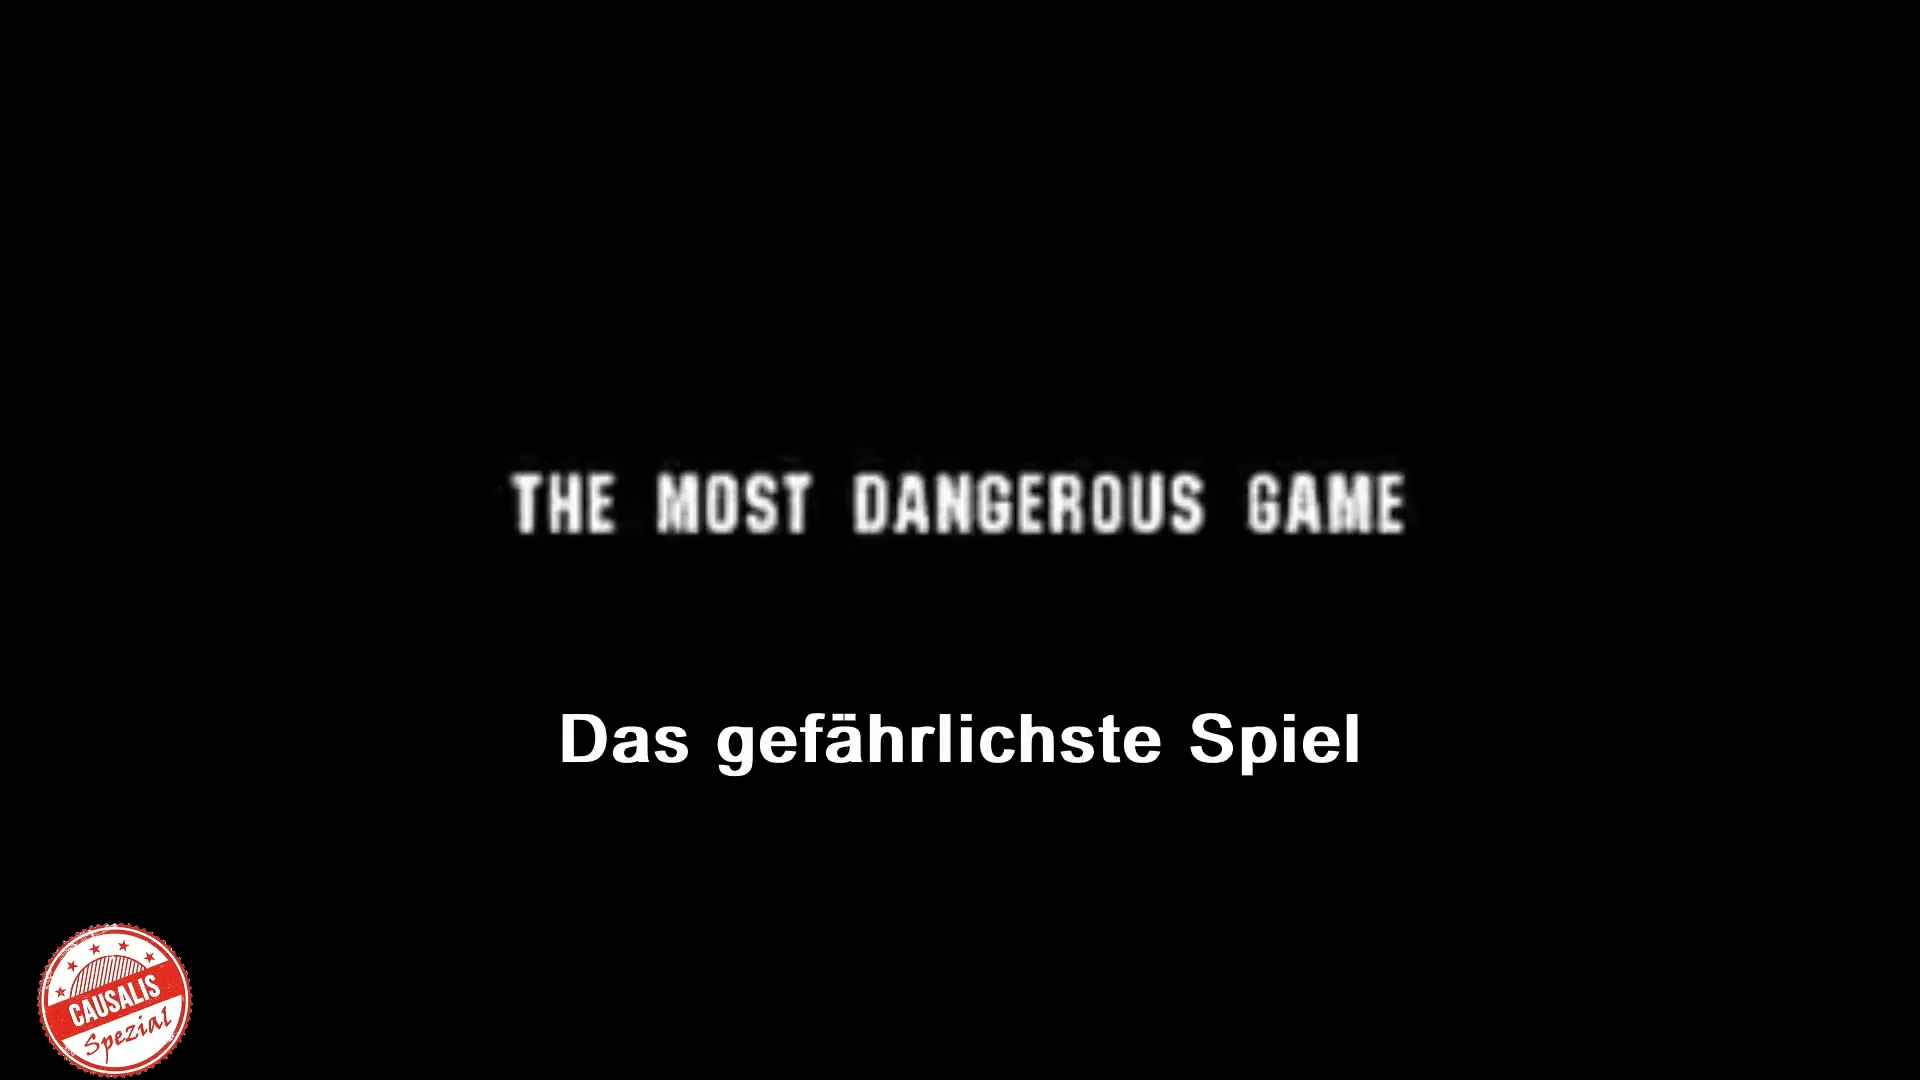 The most dangerous game (Cathy O'Brien, Doku 2002, dt. UT)